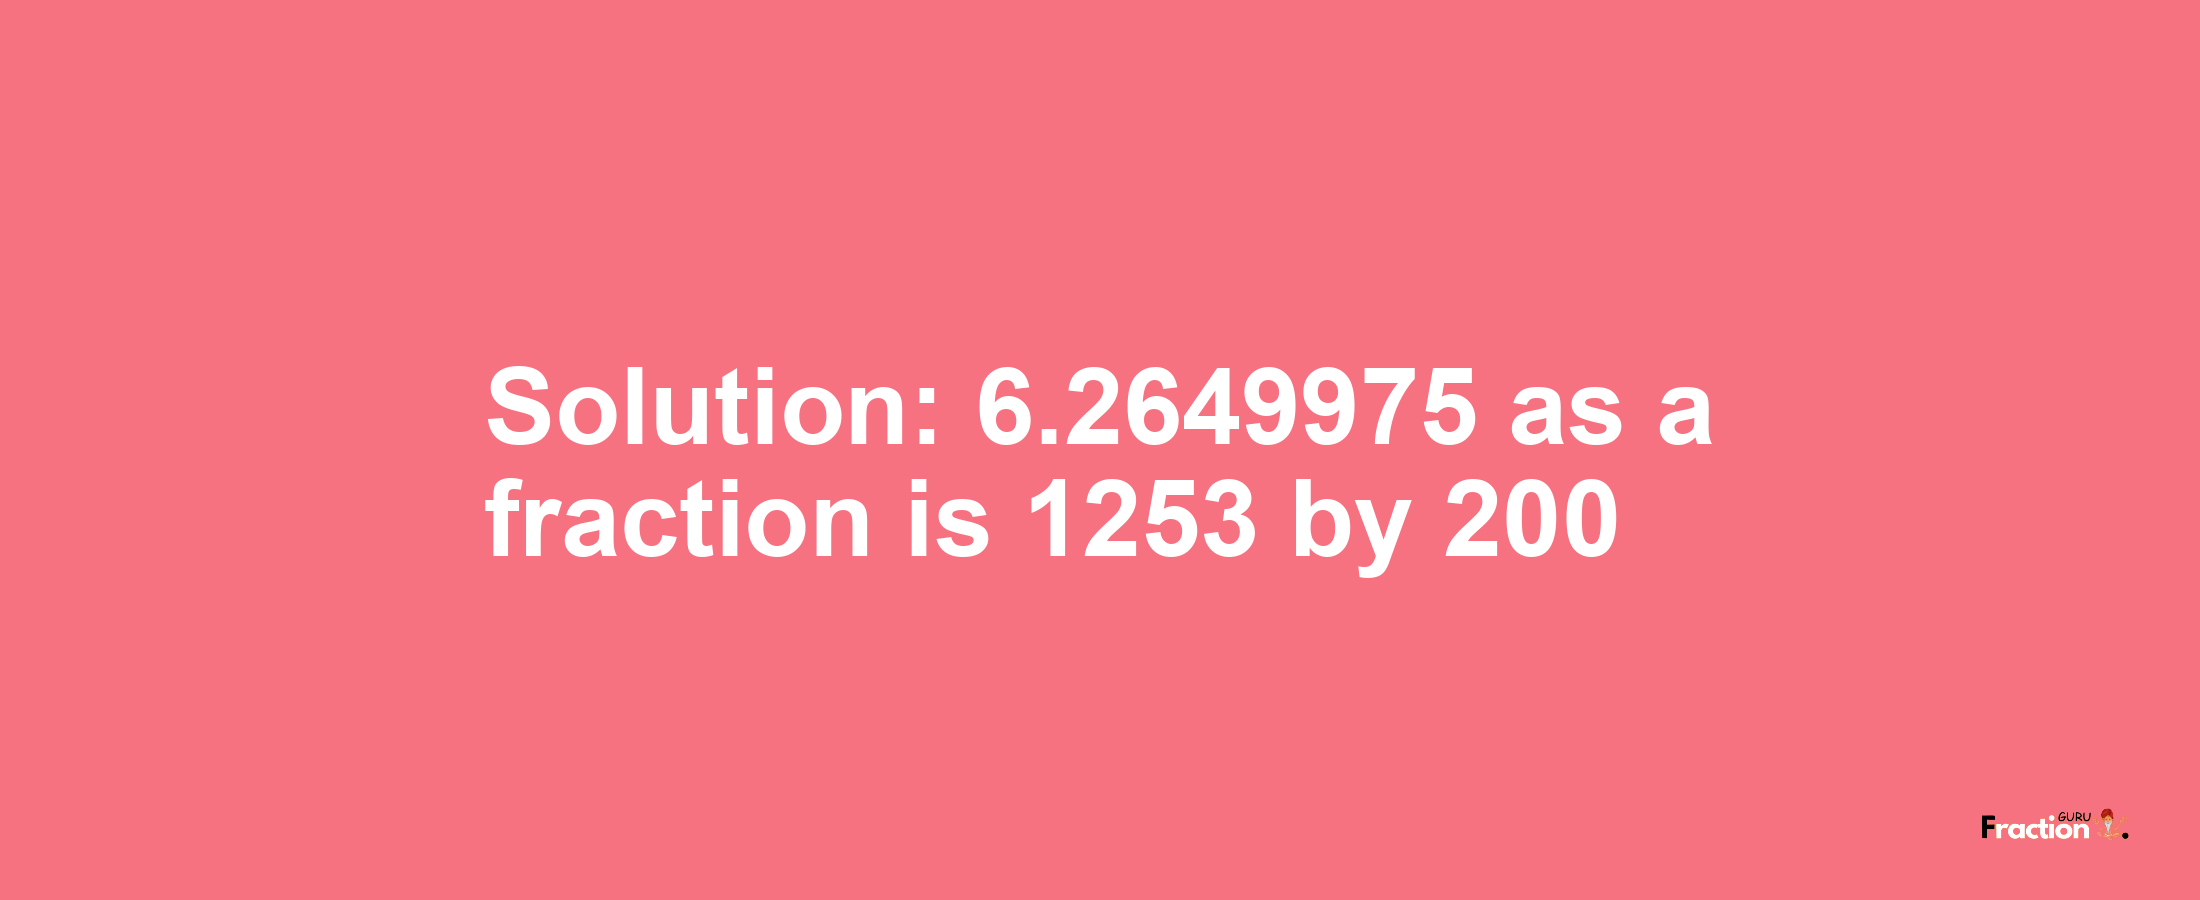 Solution:6.2649975 as a fraction is 1253/200